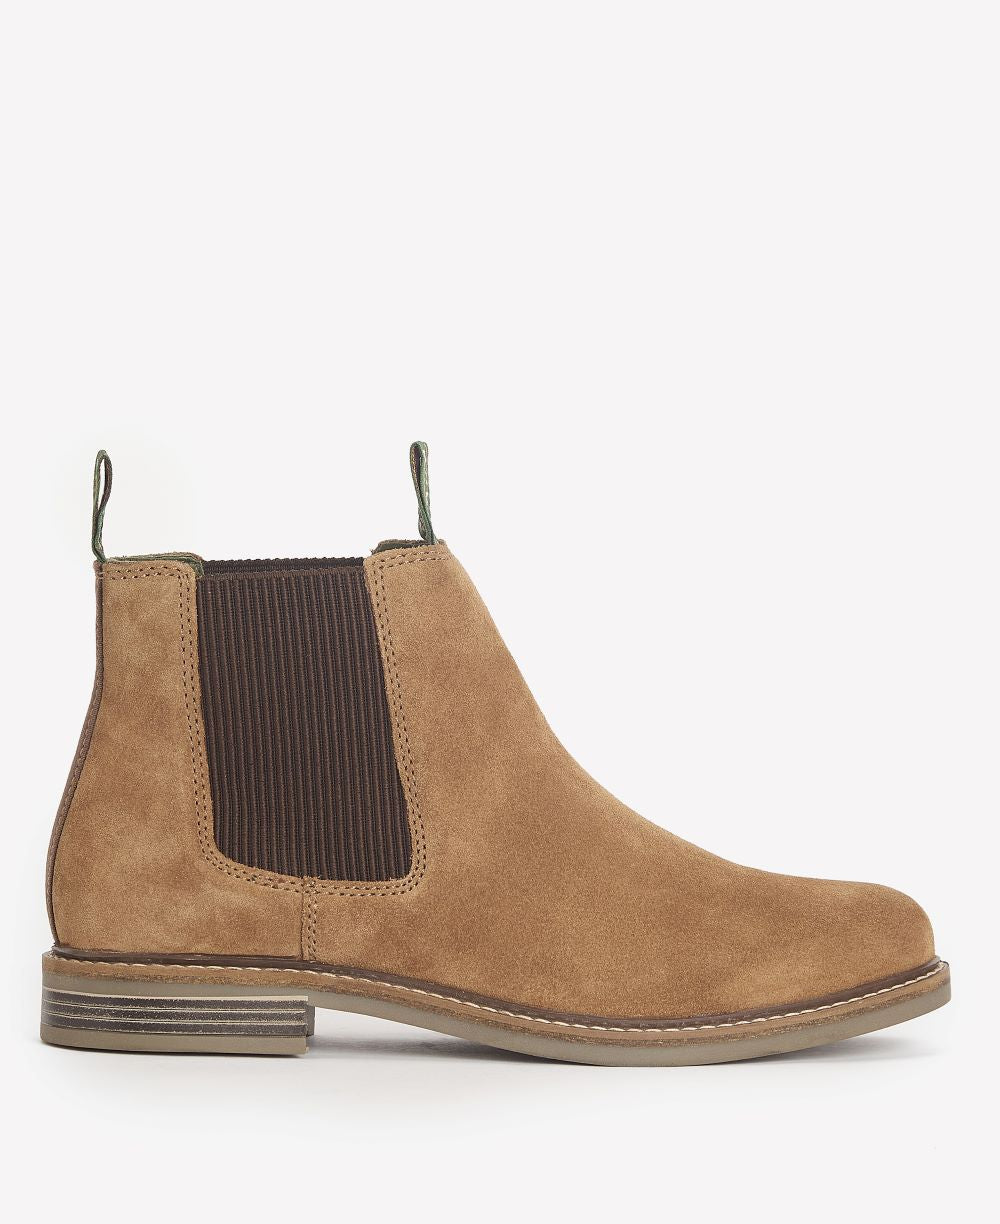 Barbour Men's Farsley Chelsea Boot in Fawn Suede